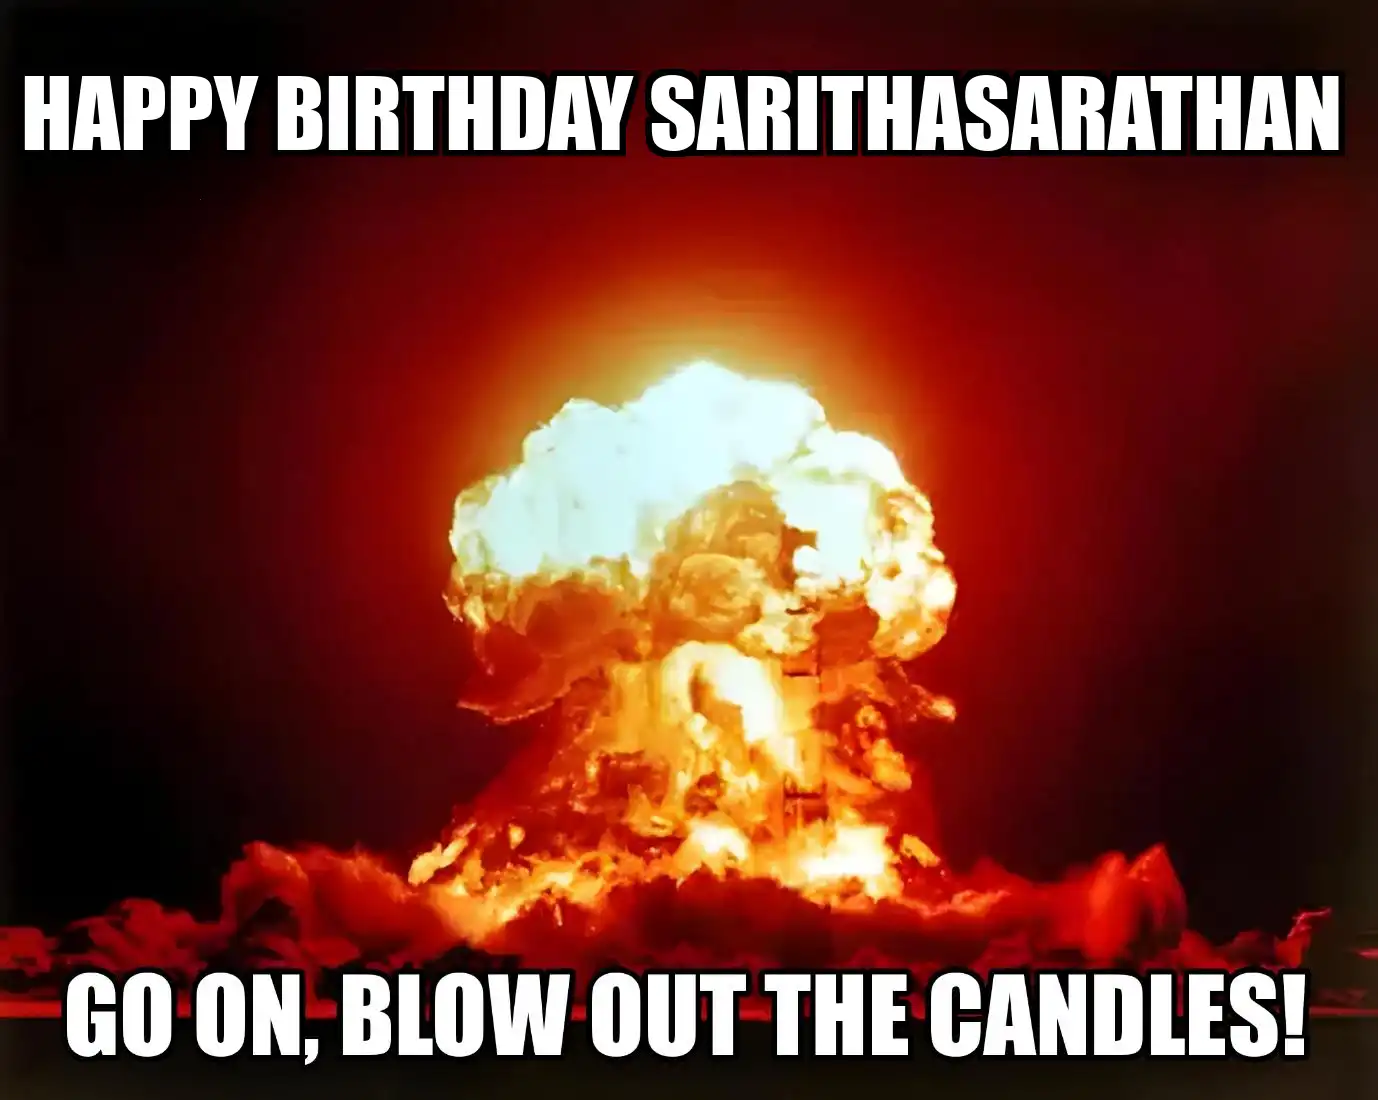 Happy Birthday Sarithasarathan Go On Blow Out The Candles Meme